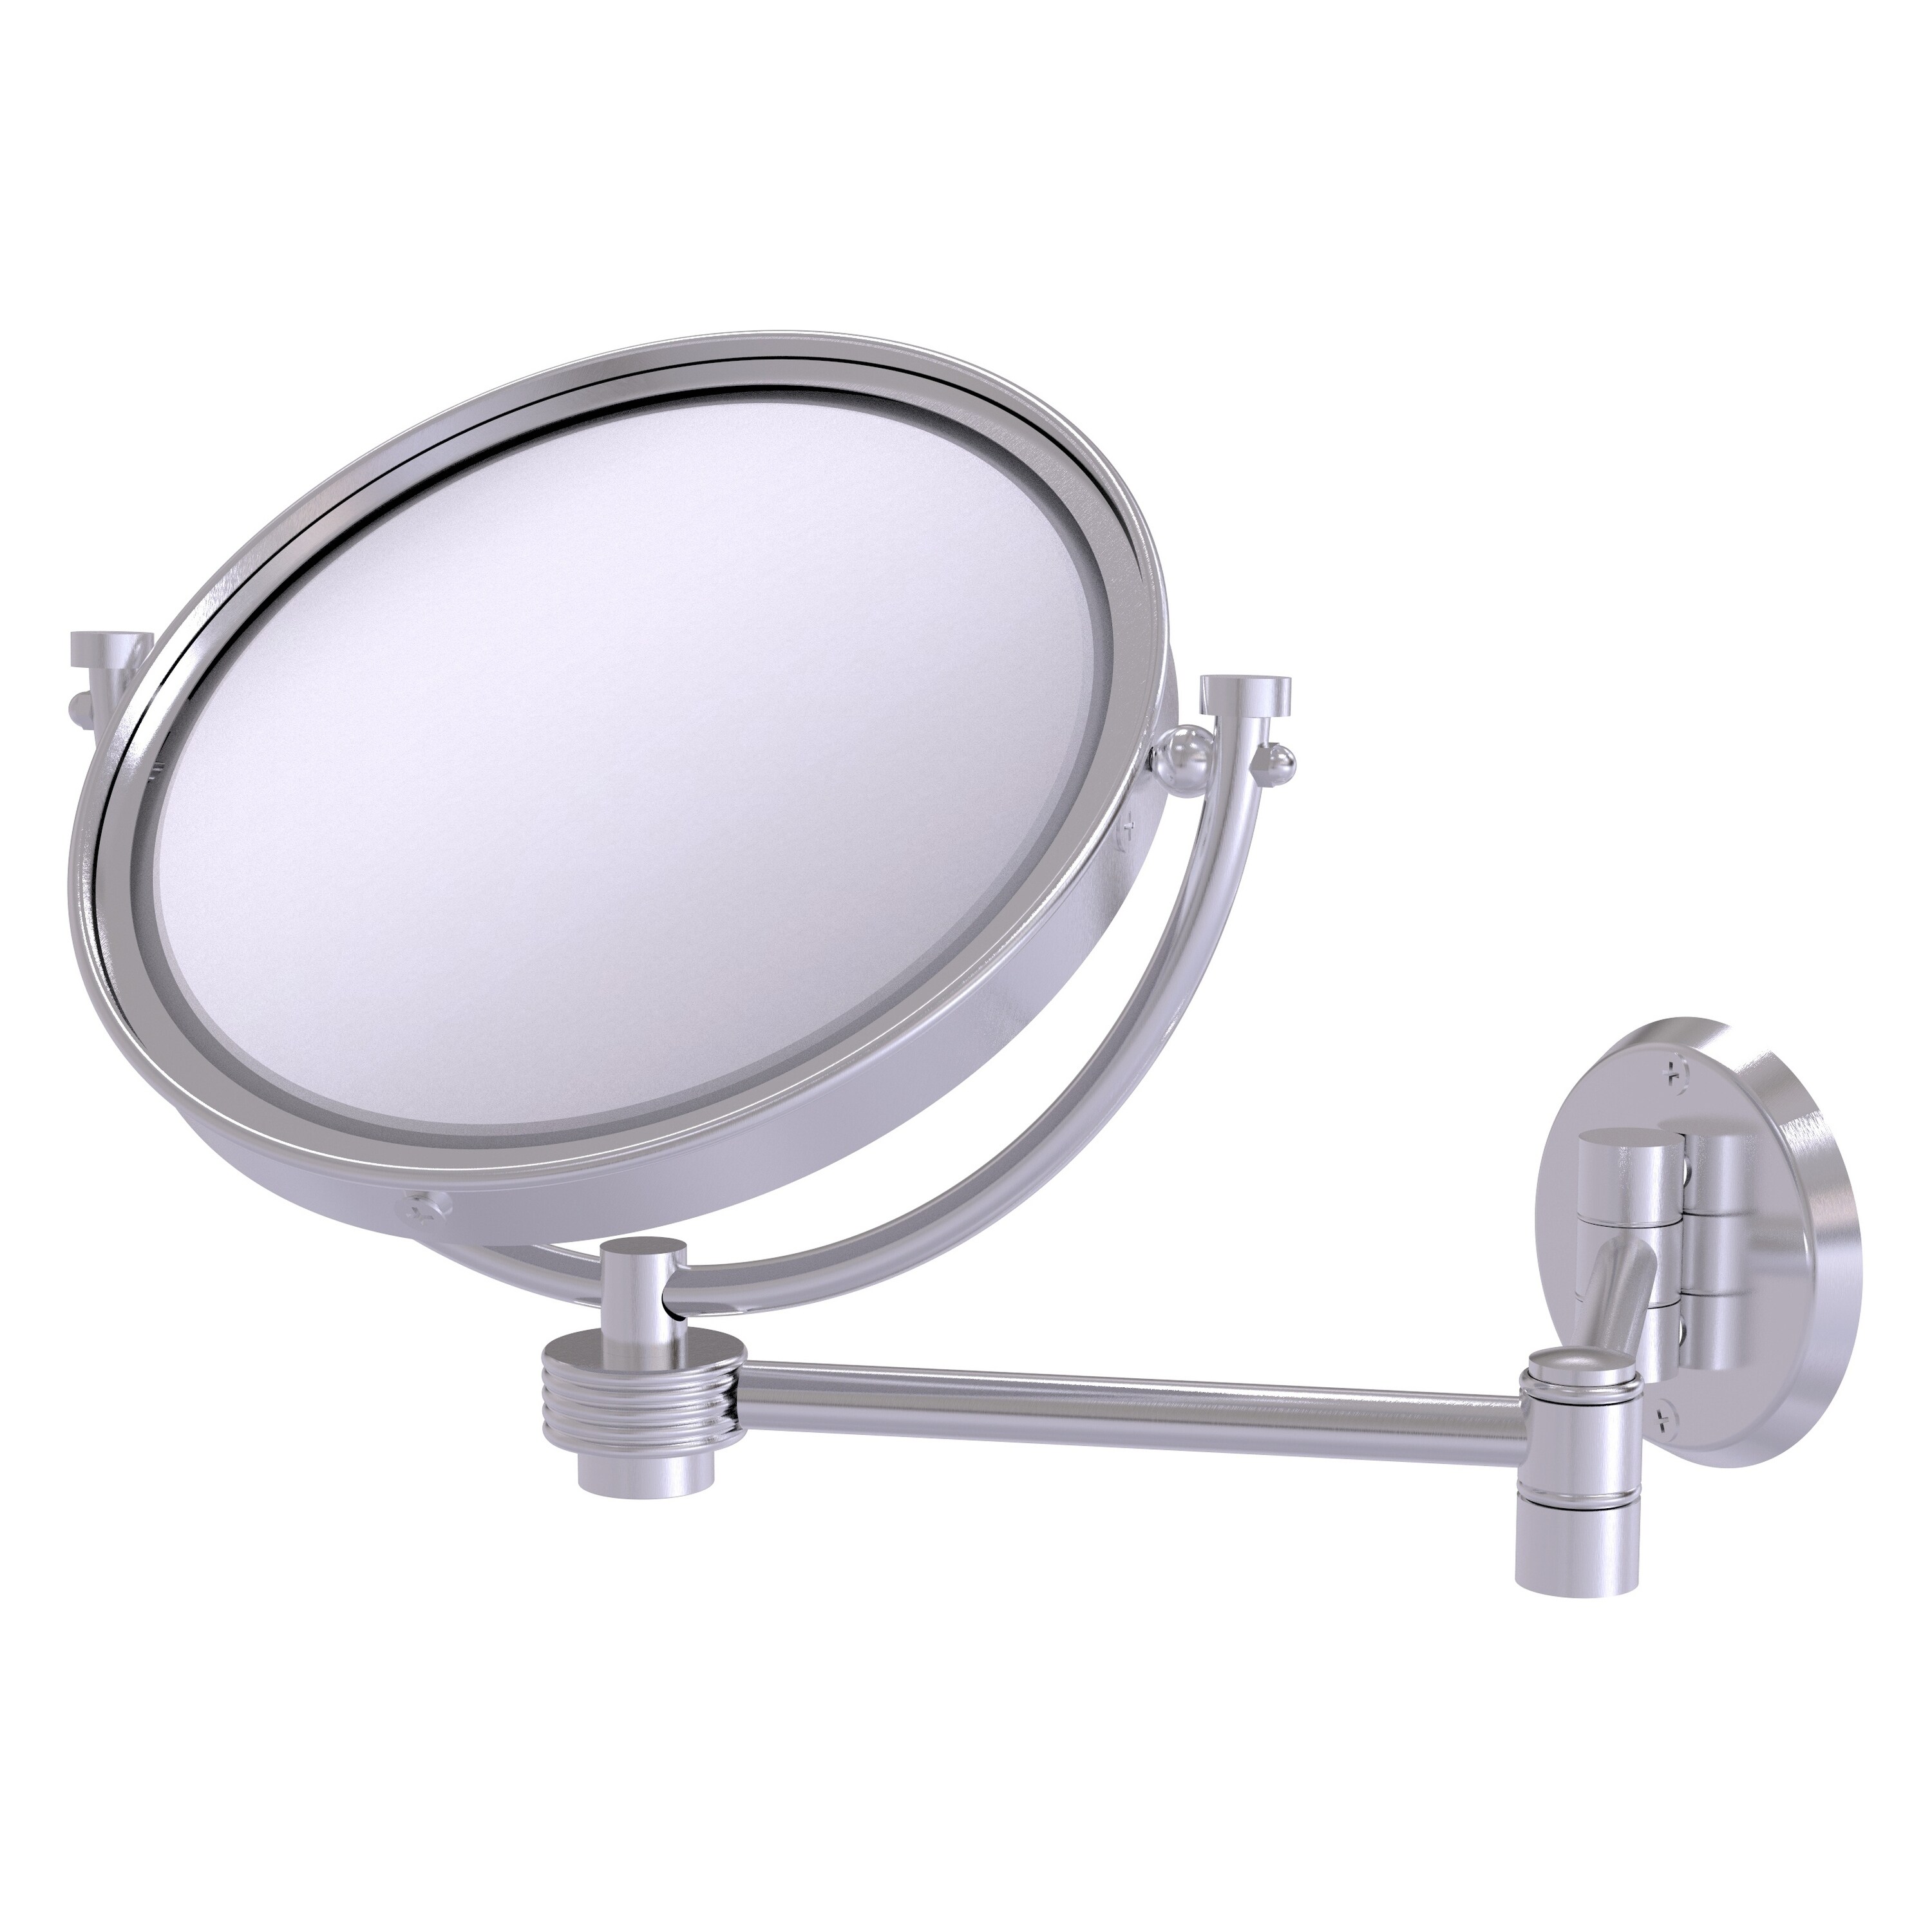 8-in x 10-in Satin Chrome Double-sided 3X Magnifying Wall-mounted Vanity Mirror | - Allied Brass WM-6G/3X-SCH